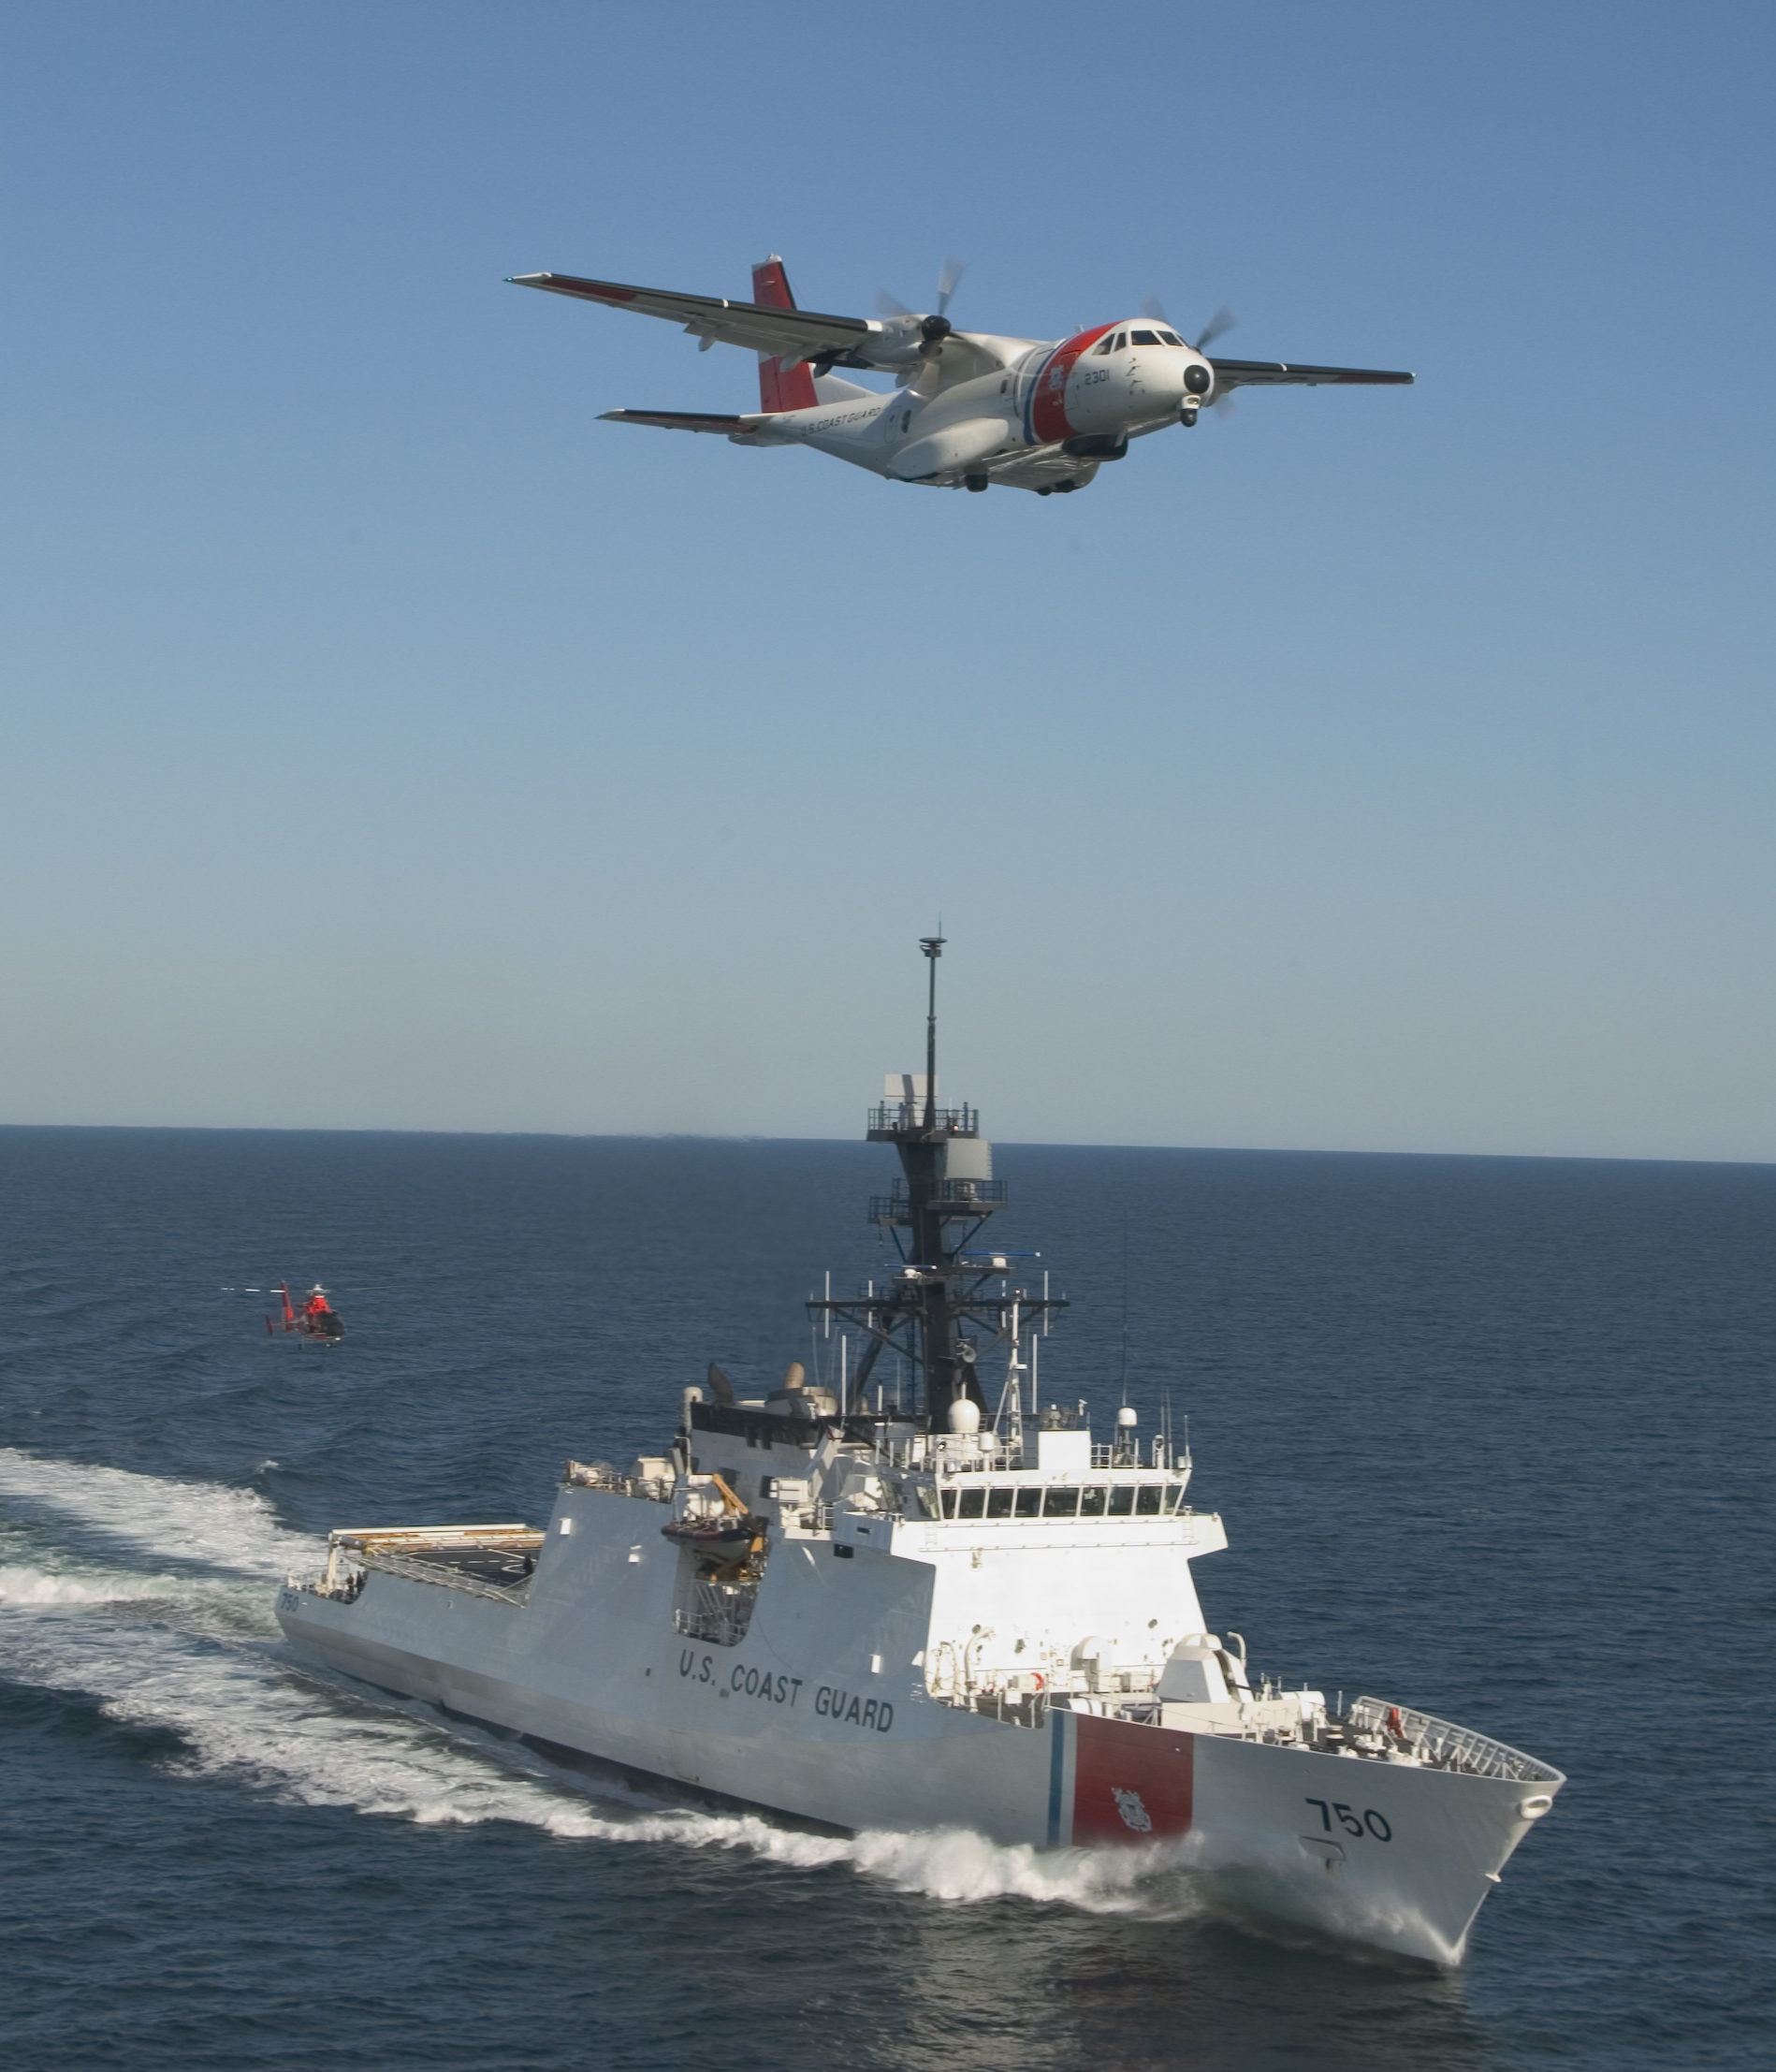 The U. S. Coast Guard's first national security cutter took to the sea on Friday, operating in concert with the service's new maritime patrol aircraft, the Ocean Sentry HC-144A, and a newly re-engined MH-65C helicopter. US Coast Guard photo.